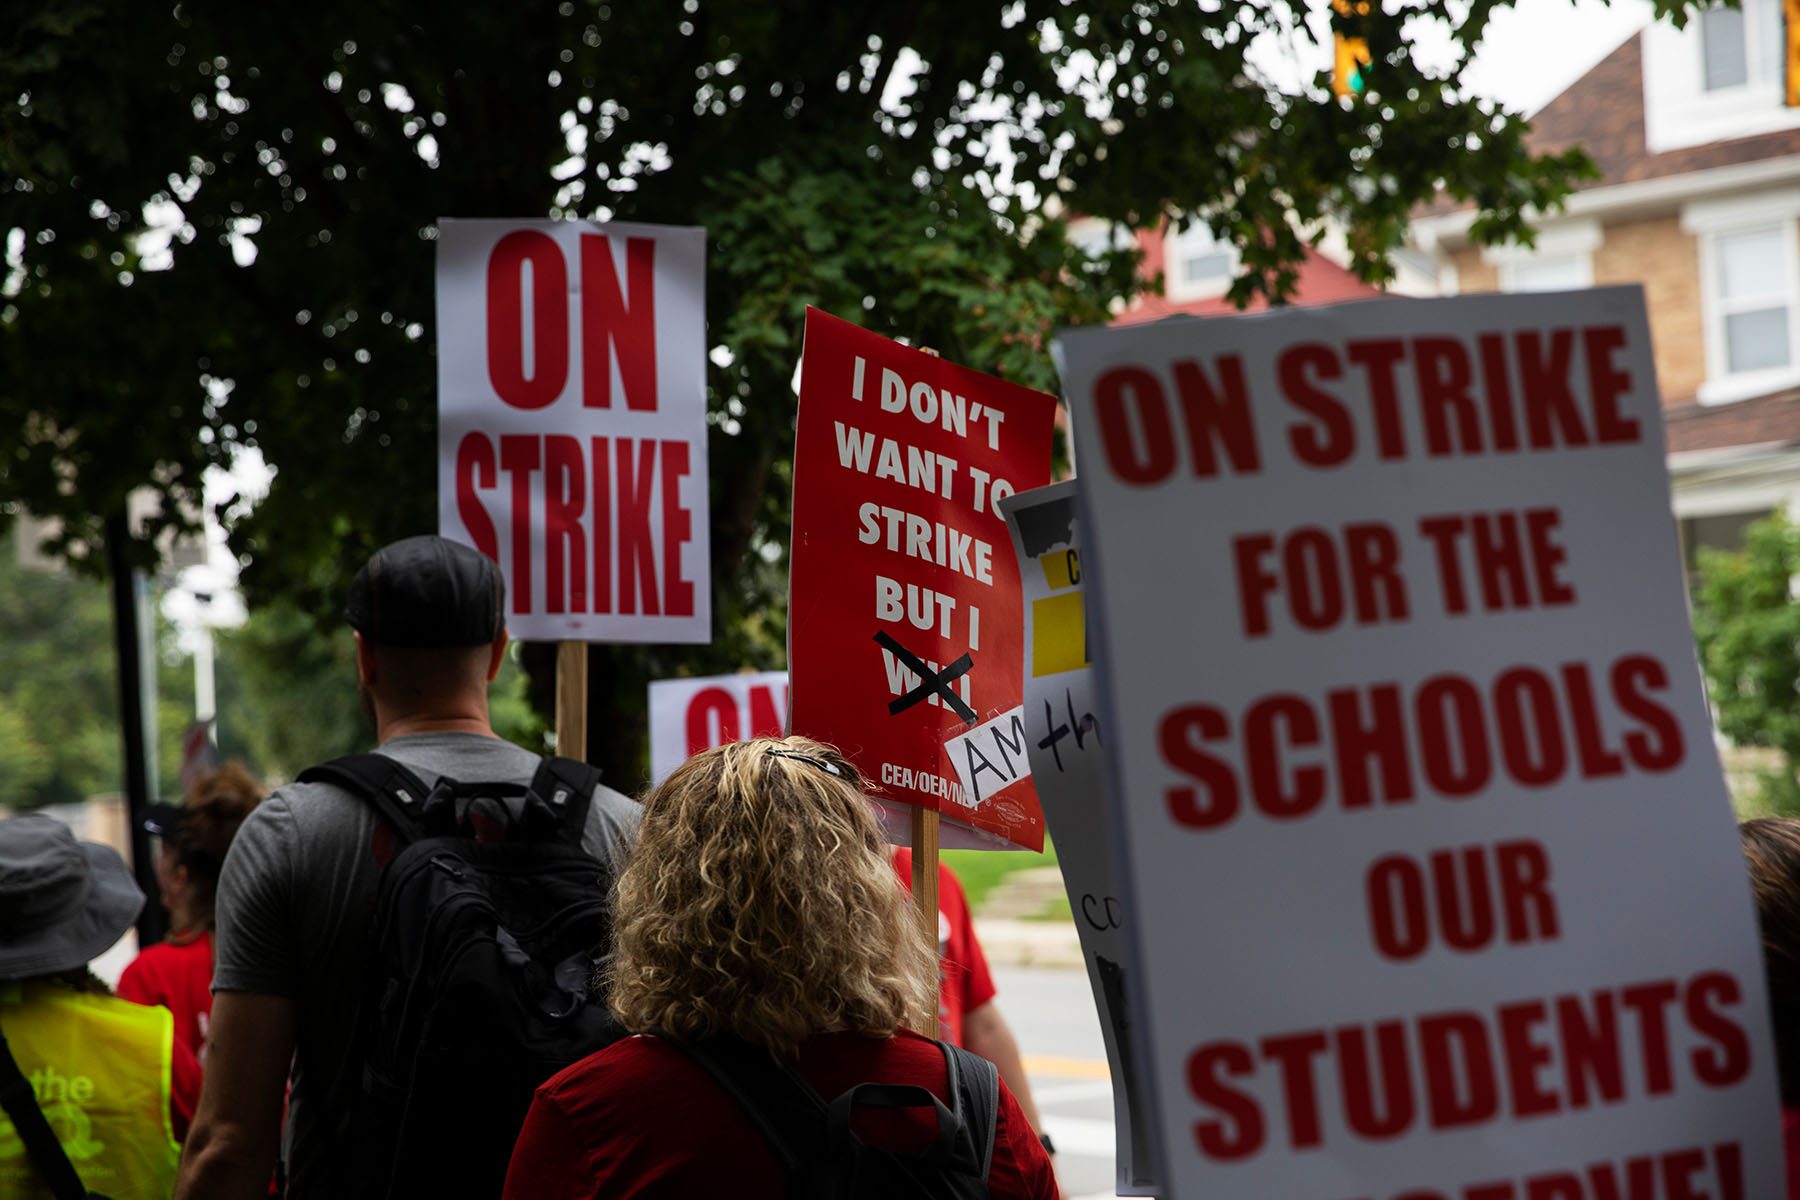 Columbus City School teachers strike outside of Livingston Elementary School. They carry signs that read "On Strike," "I don't want to strike but i will." and "on strike for the schools our students deserve."